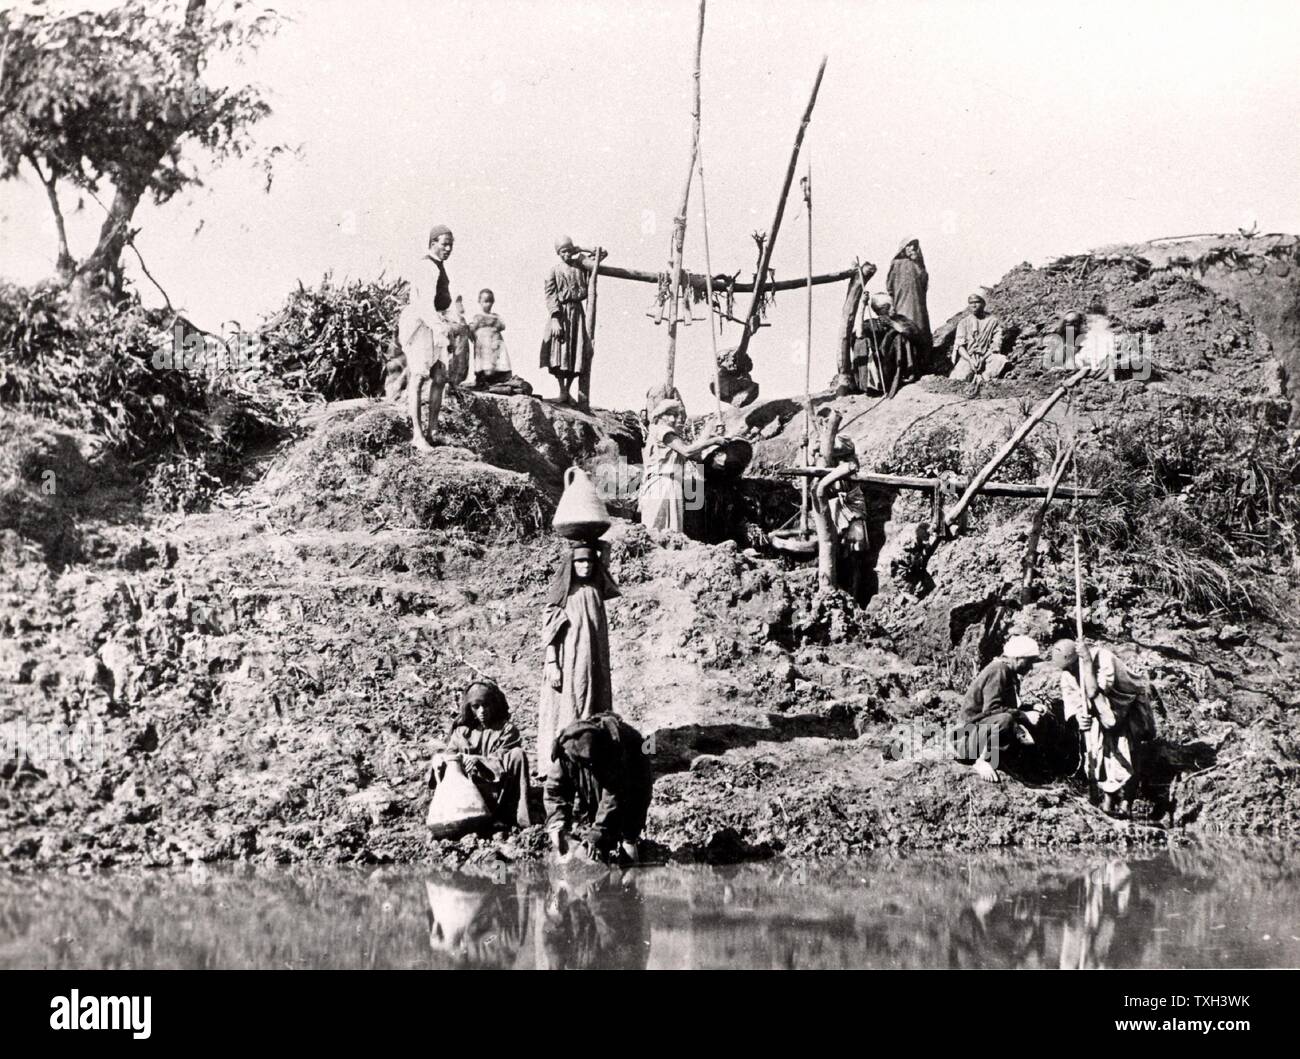 A shaduf or shadoof being used to raise water, Egypt, late 1880s. The shaduf has been used for irrigation for at least as early as 1500 BC. Photograph. Stock Photo